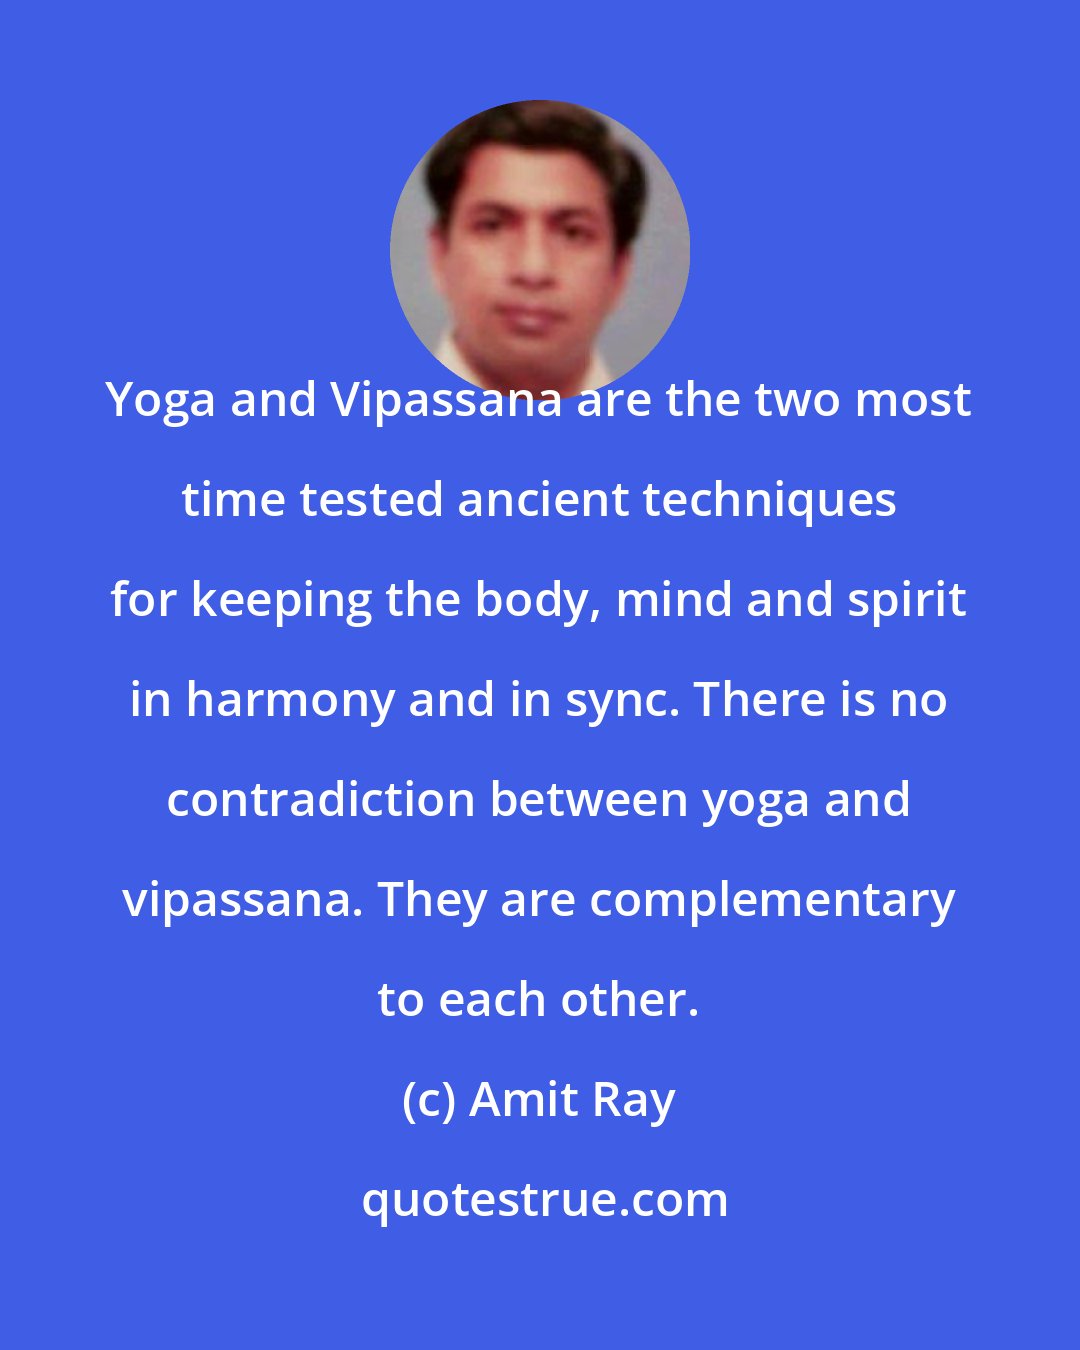 Amit Ray: Yoga and Vipassana are the two most time tested ancient techniques for keeping the body, mind and spirit in harmony and in sync. There is no contradiction between yoga and vipassana. They are complementary to each other.